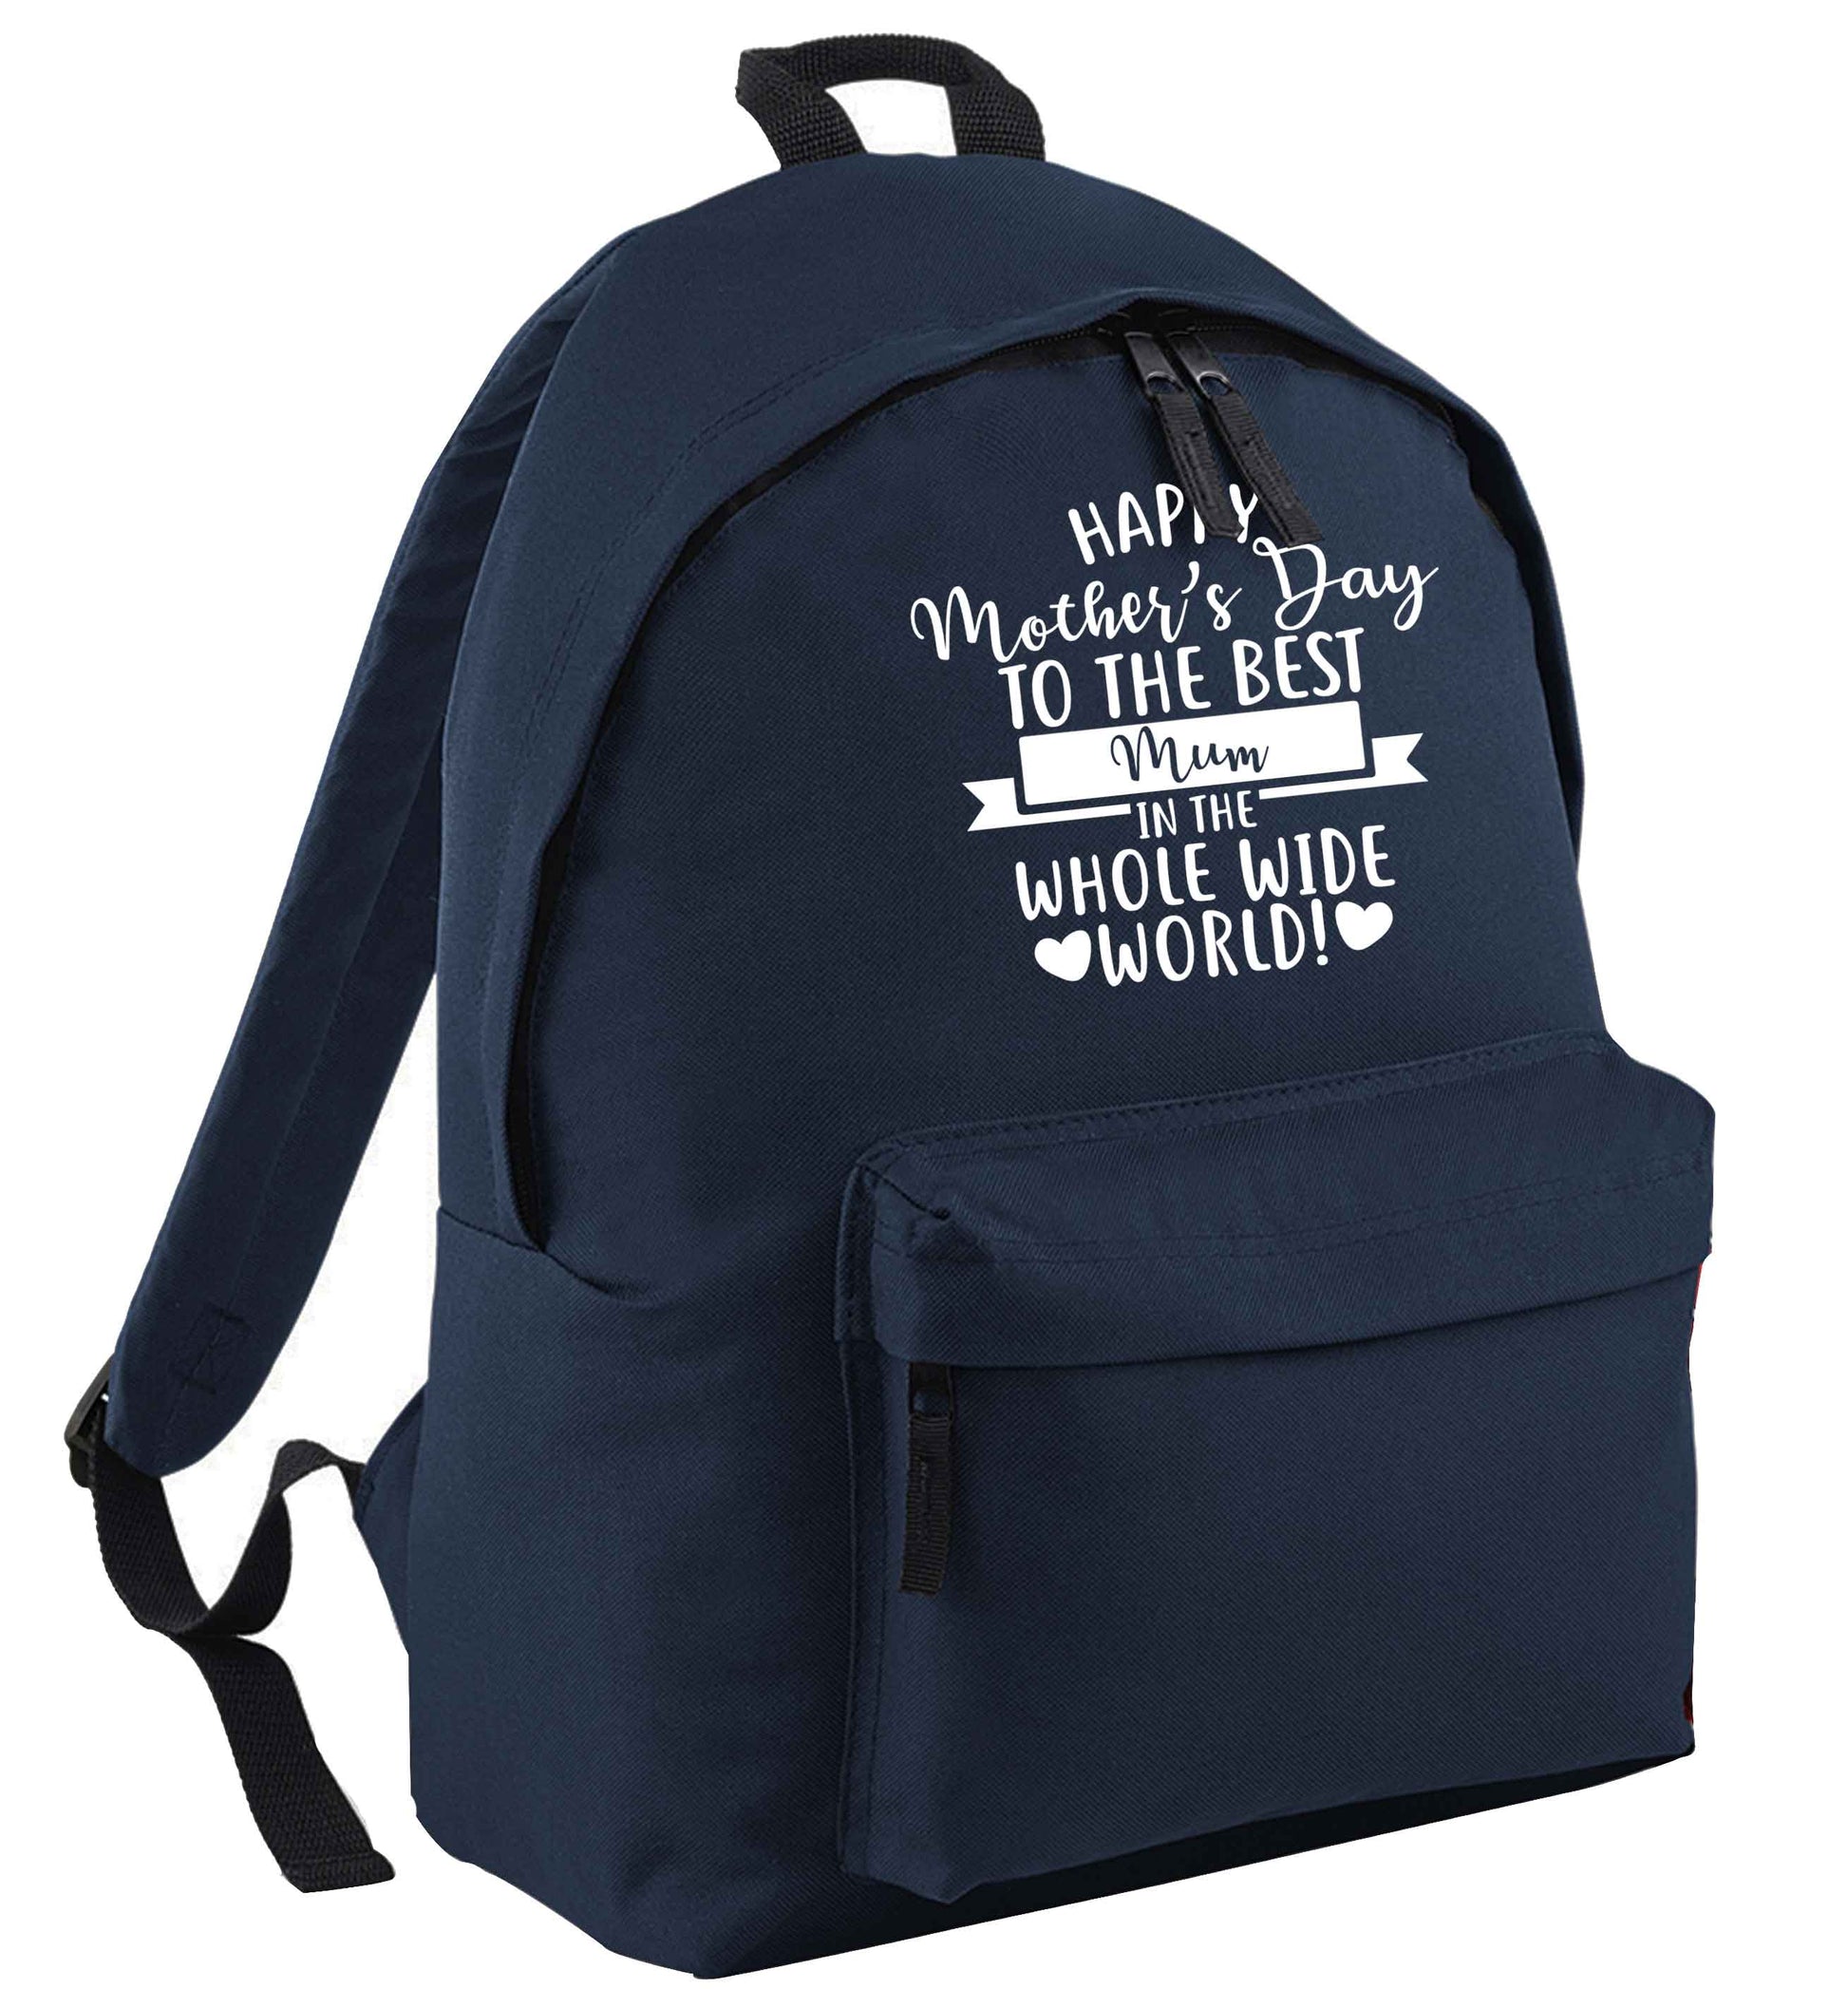 Happy mother's day to the best mum in the world navy childrens backpack